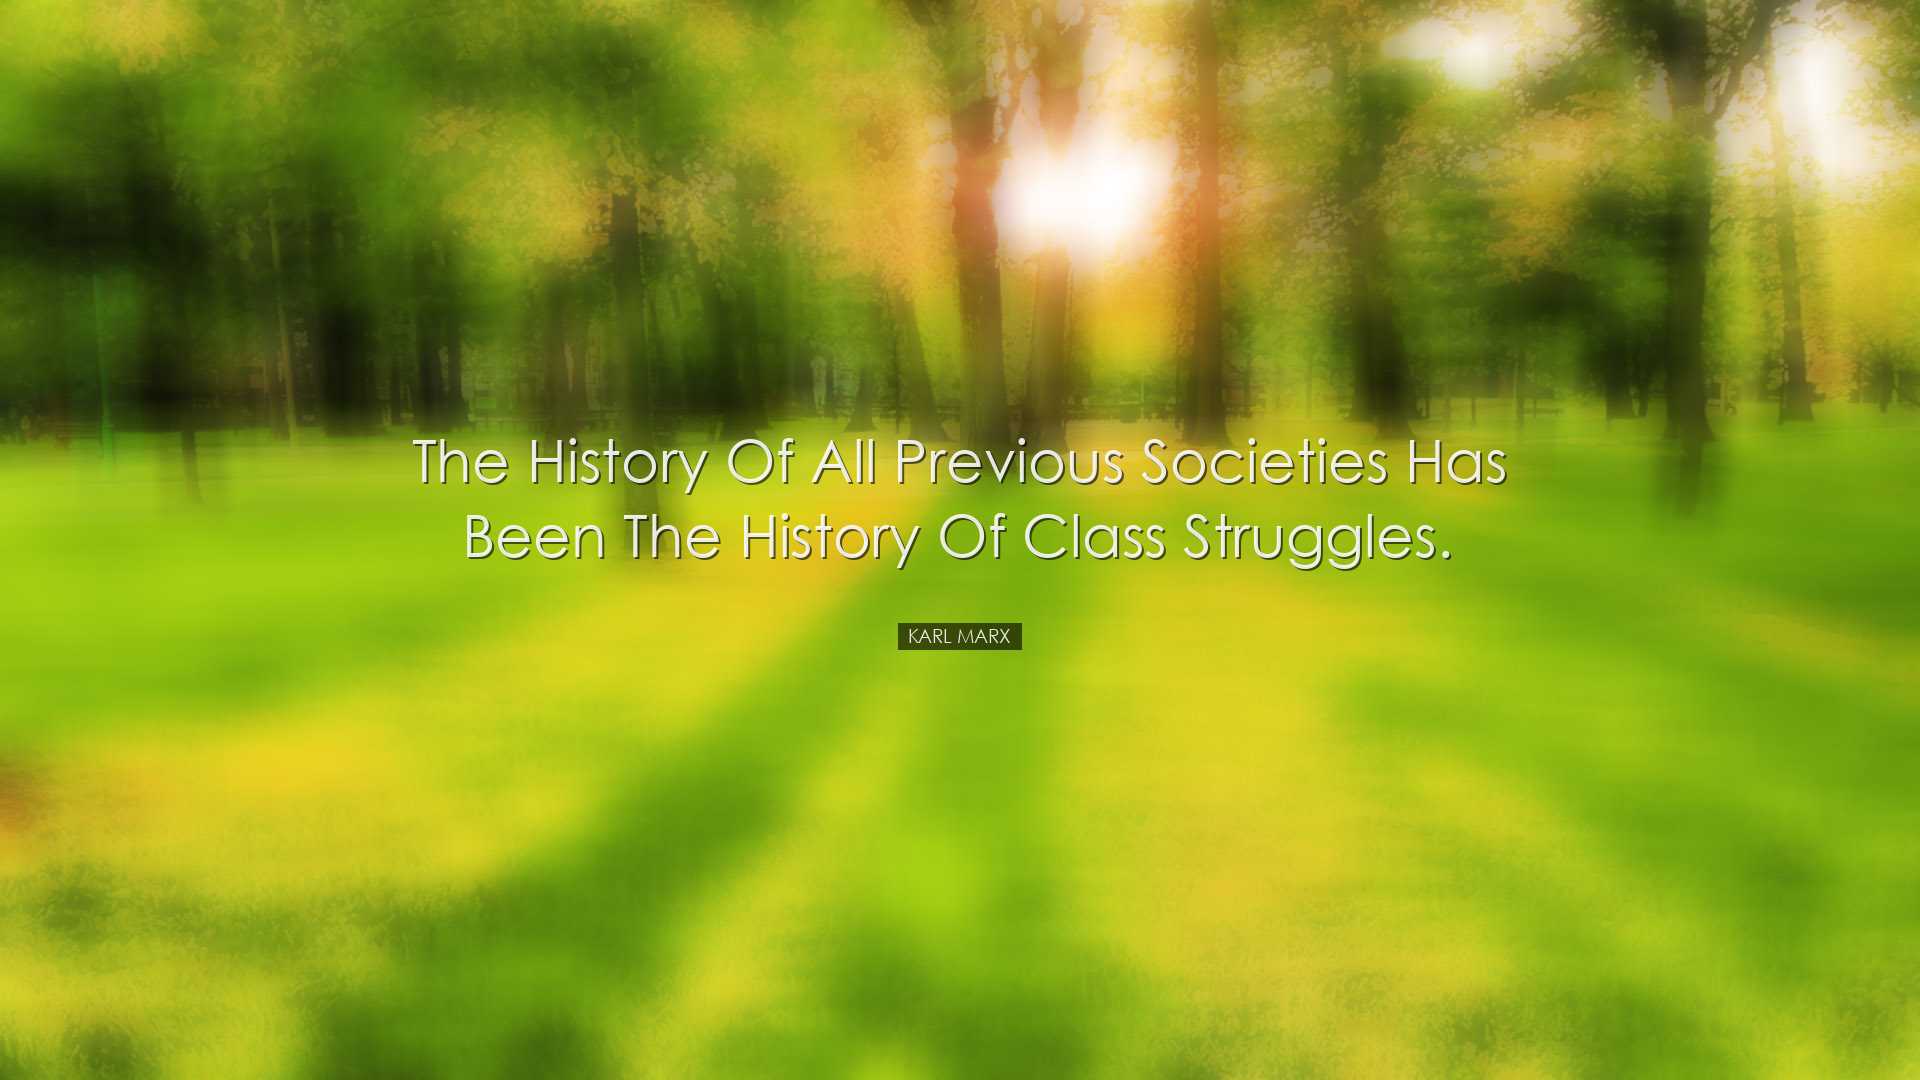 The history of all previous societies has been the history of clas